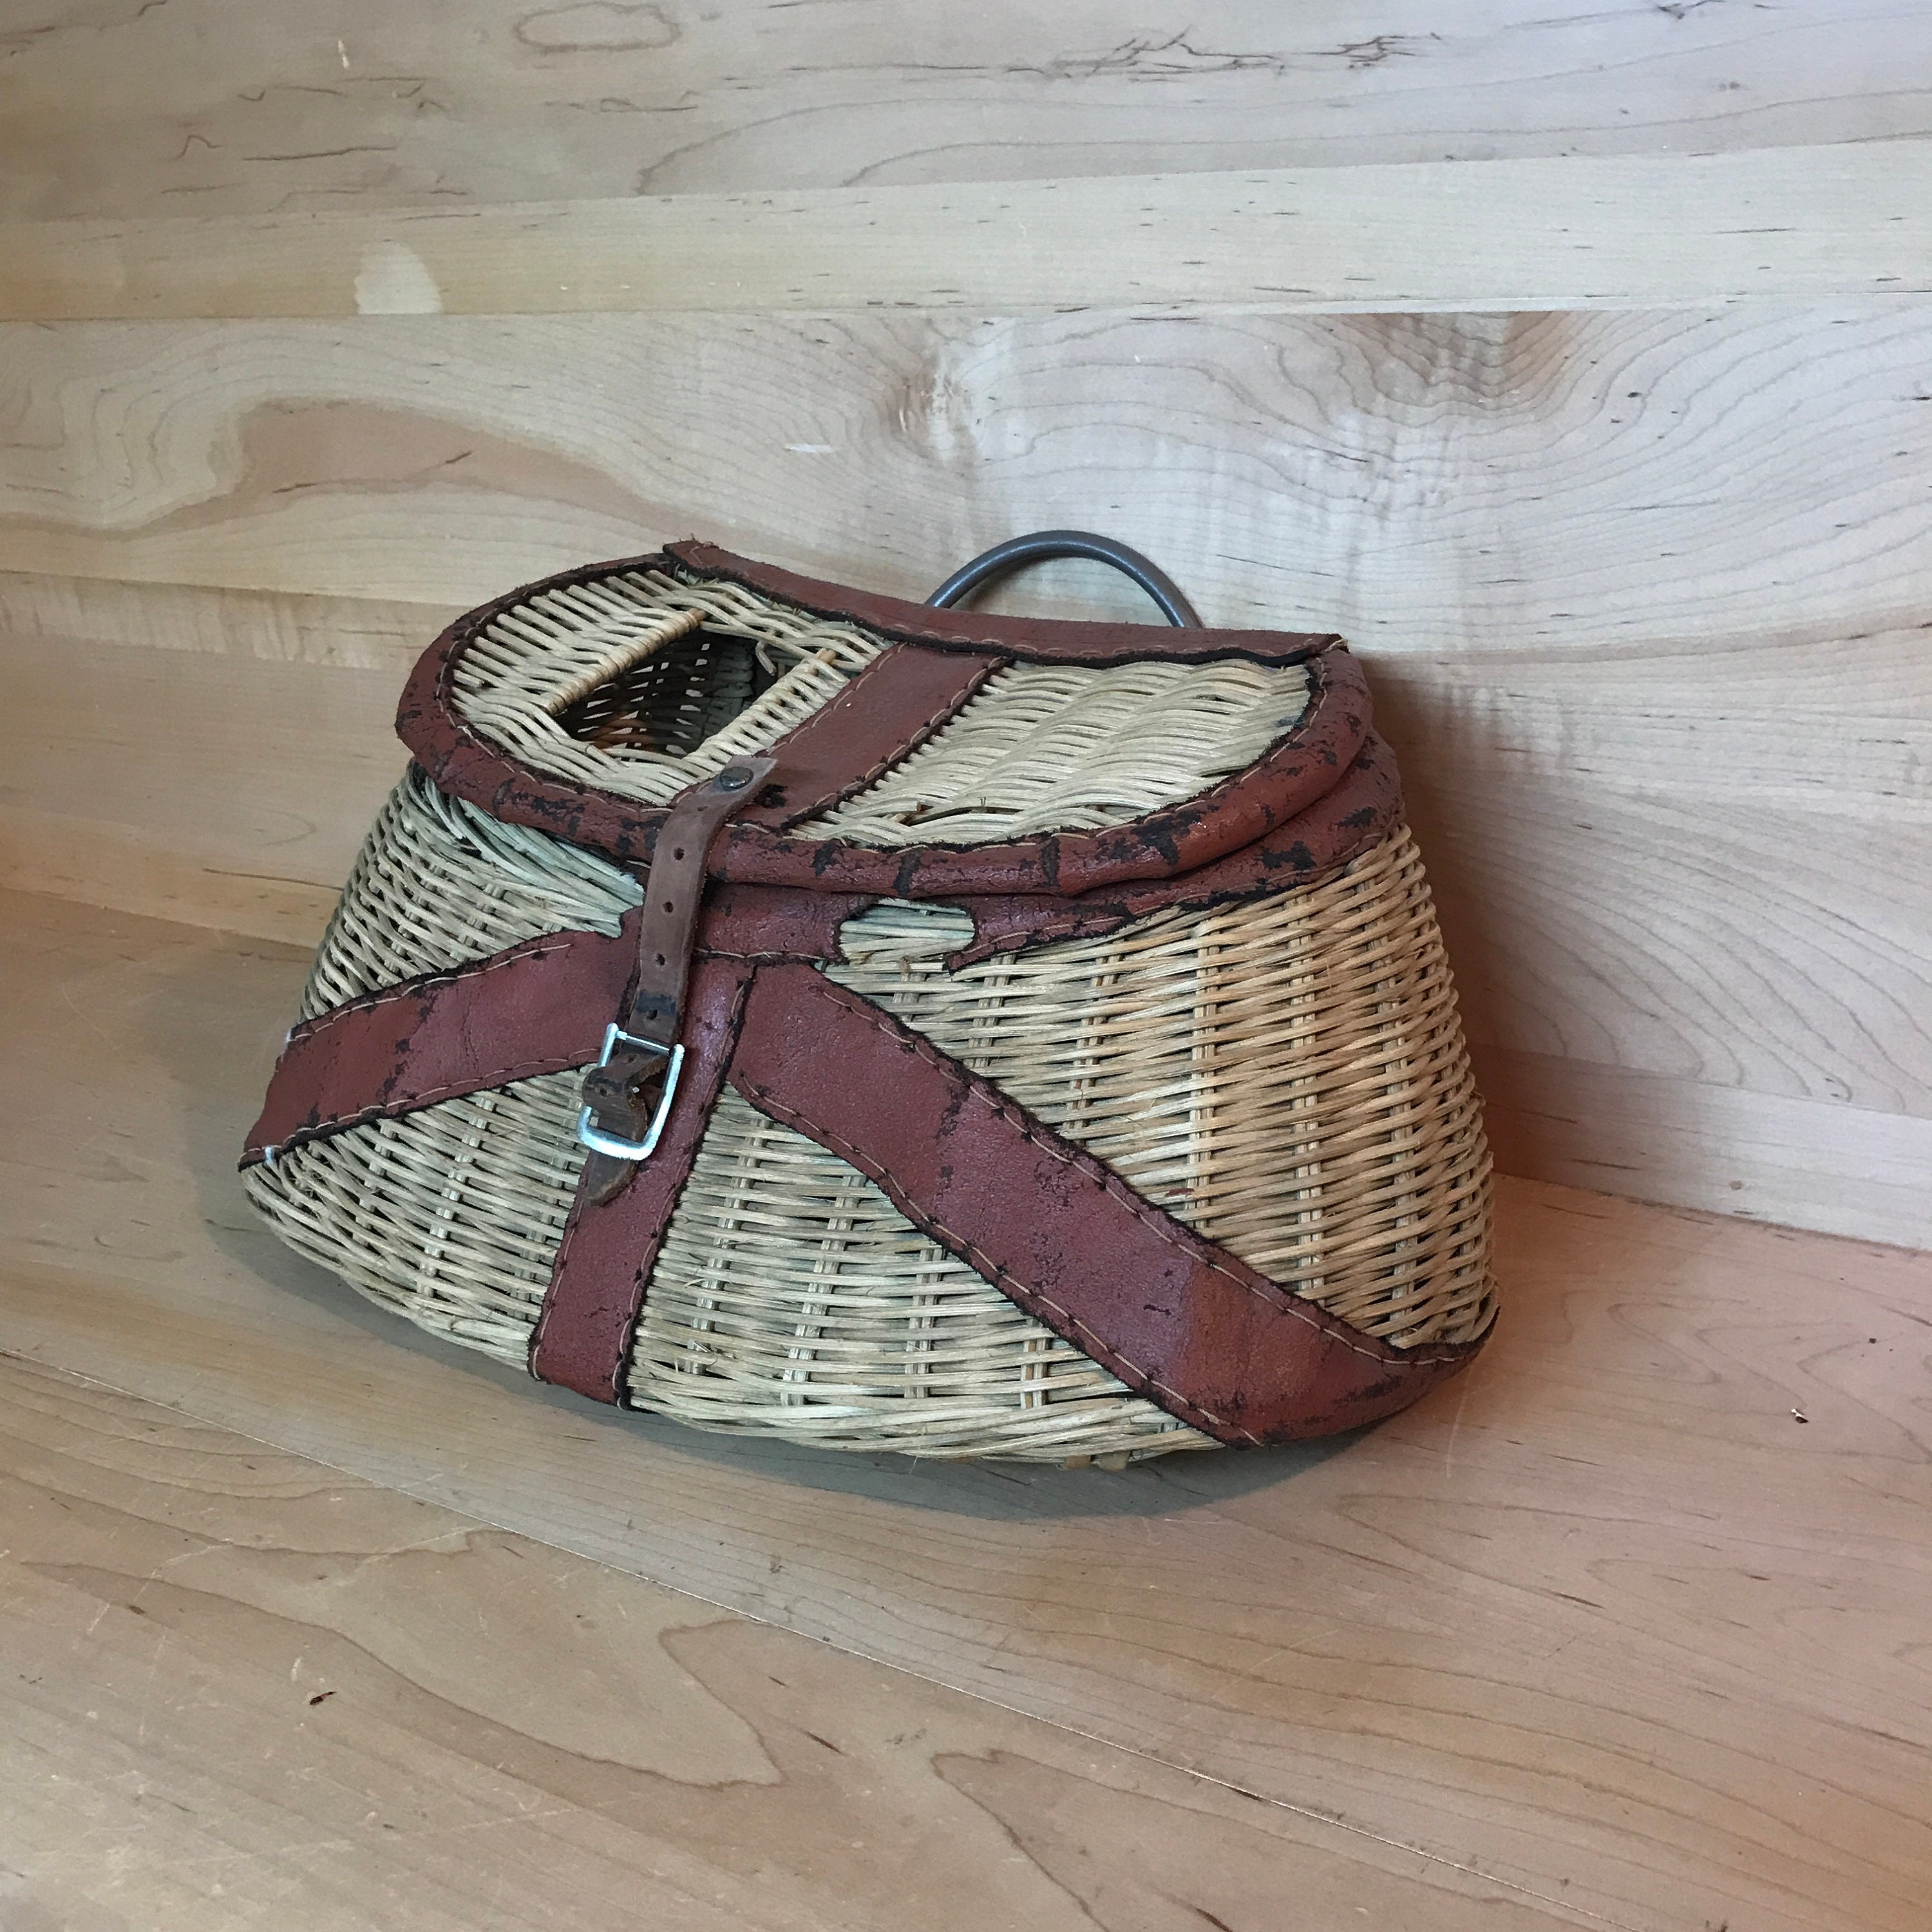 Wicker fishing creel, vintage, basket, no strap, rustic, cabin, camp, lake,  fish, old, wood, container, decor decoration, lodge, display